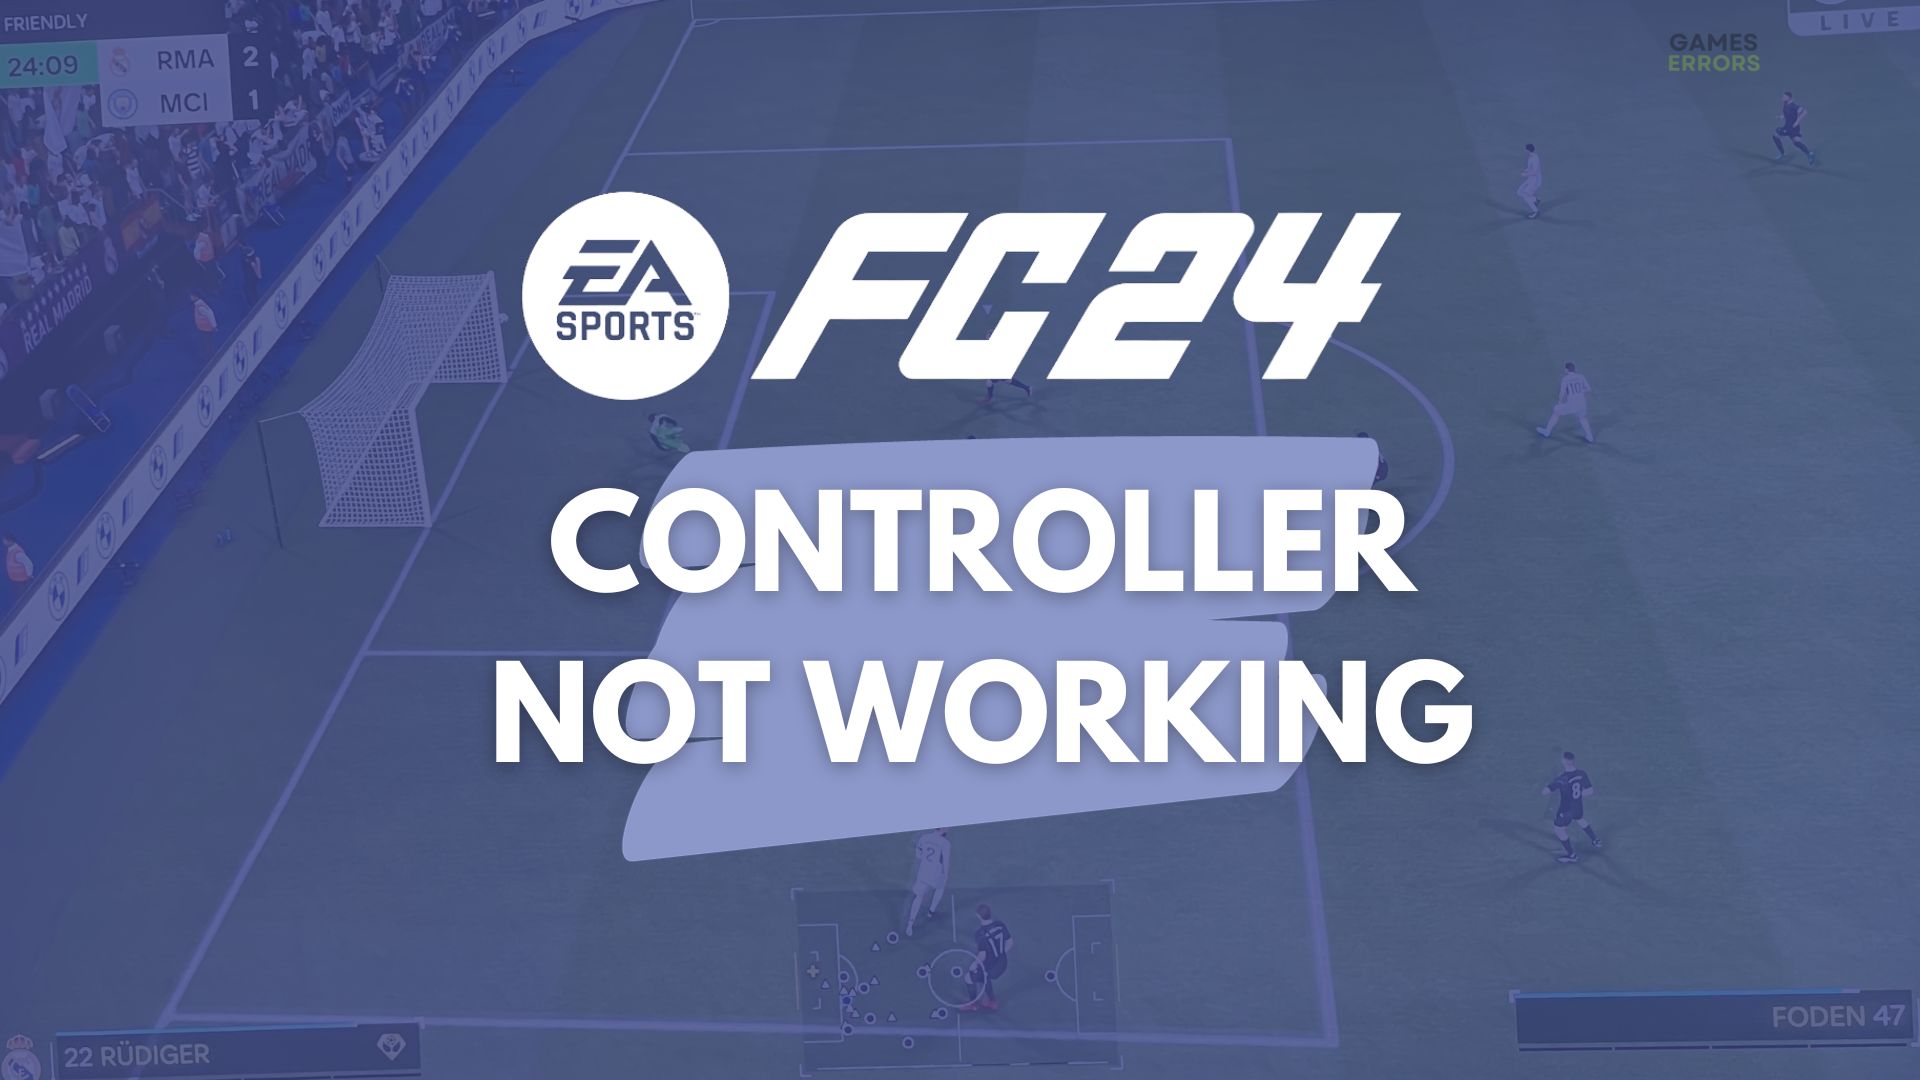 fc 24 controller not working